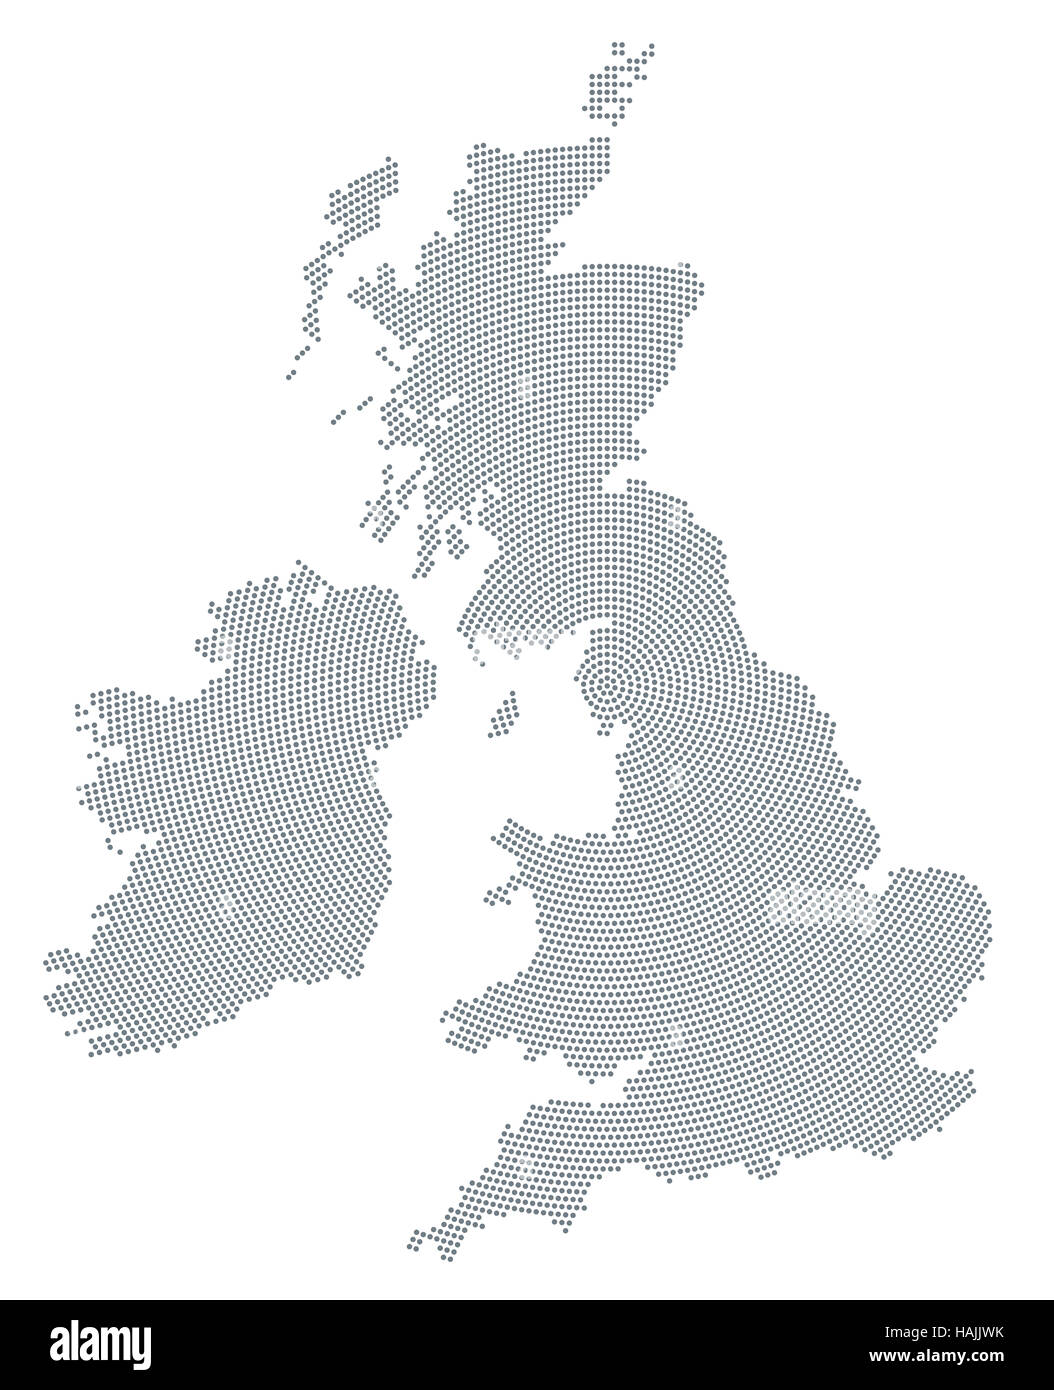 British Isles map radial dot pattern. Gray dots going from the center forming the silhouettes of Ireland and United Kingdom. Stock Photo